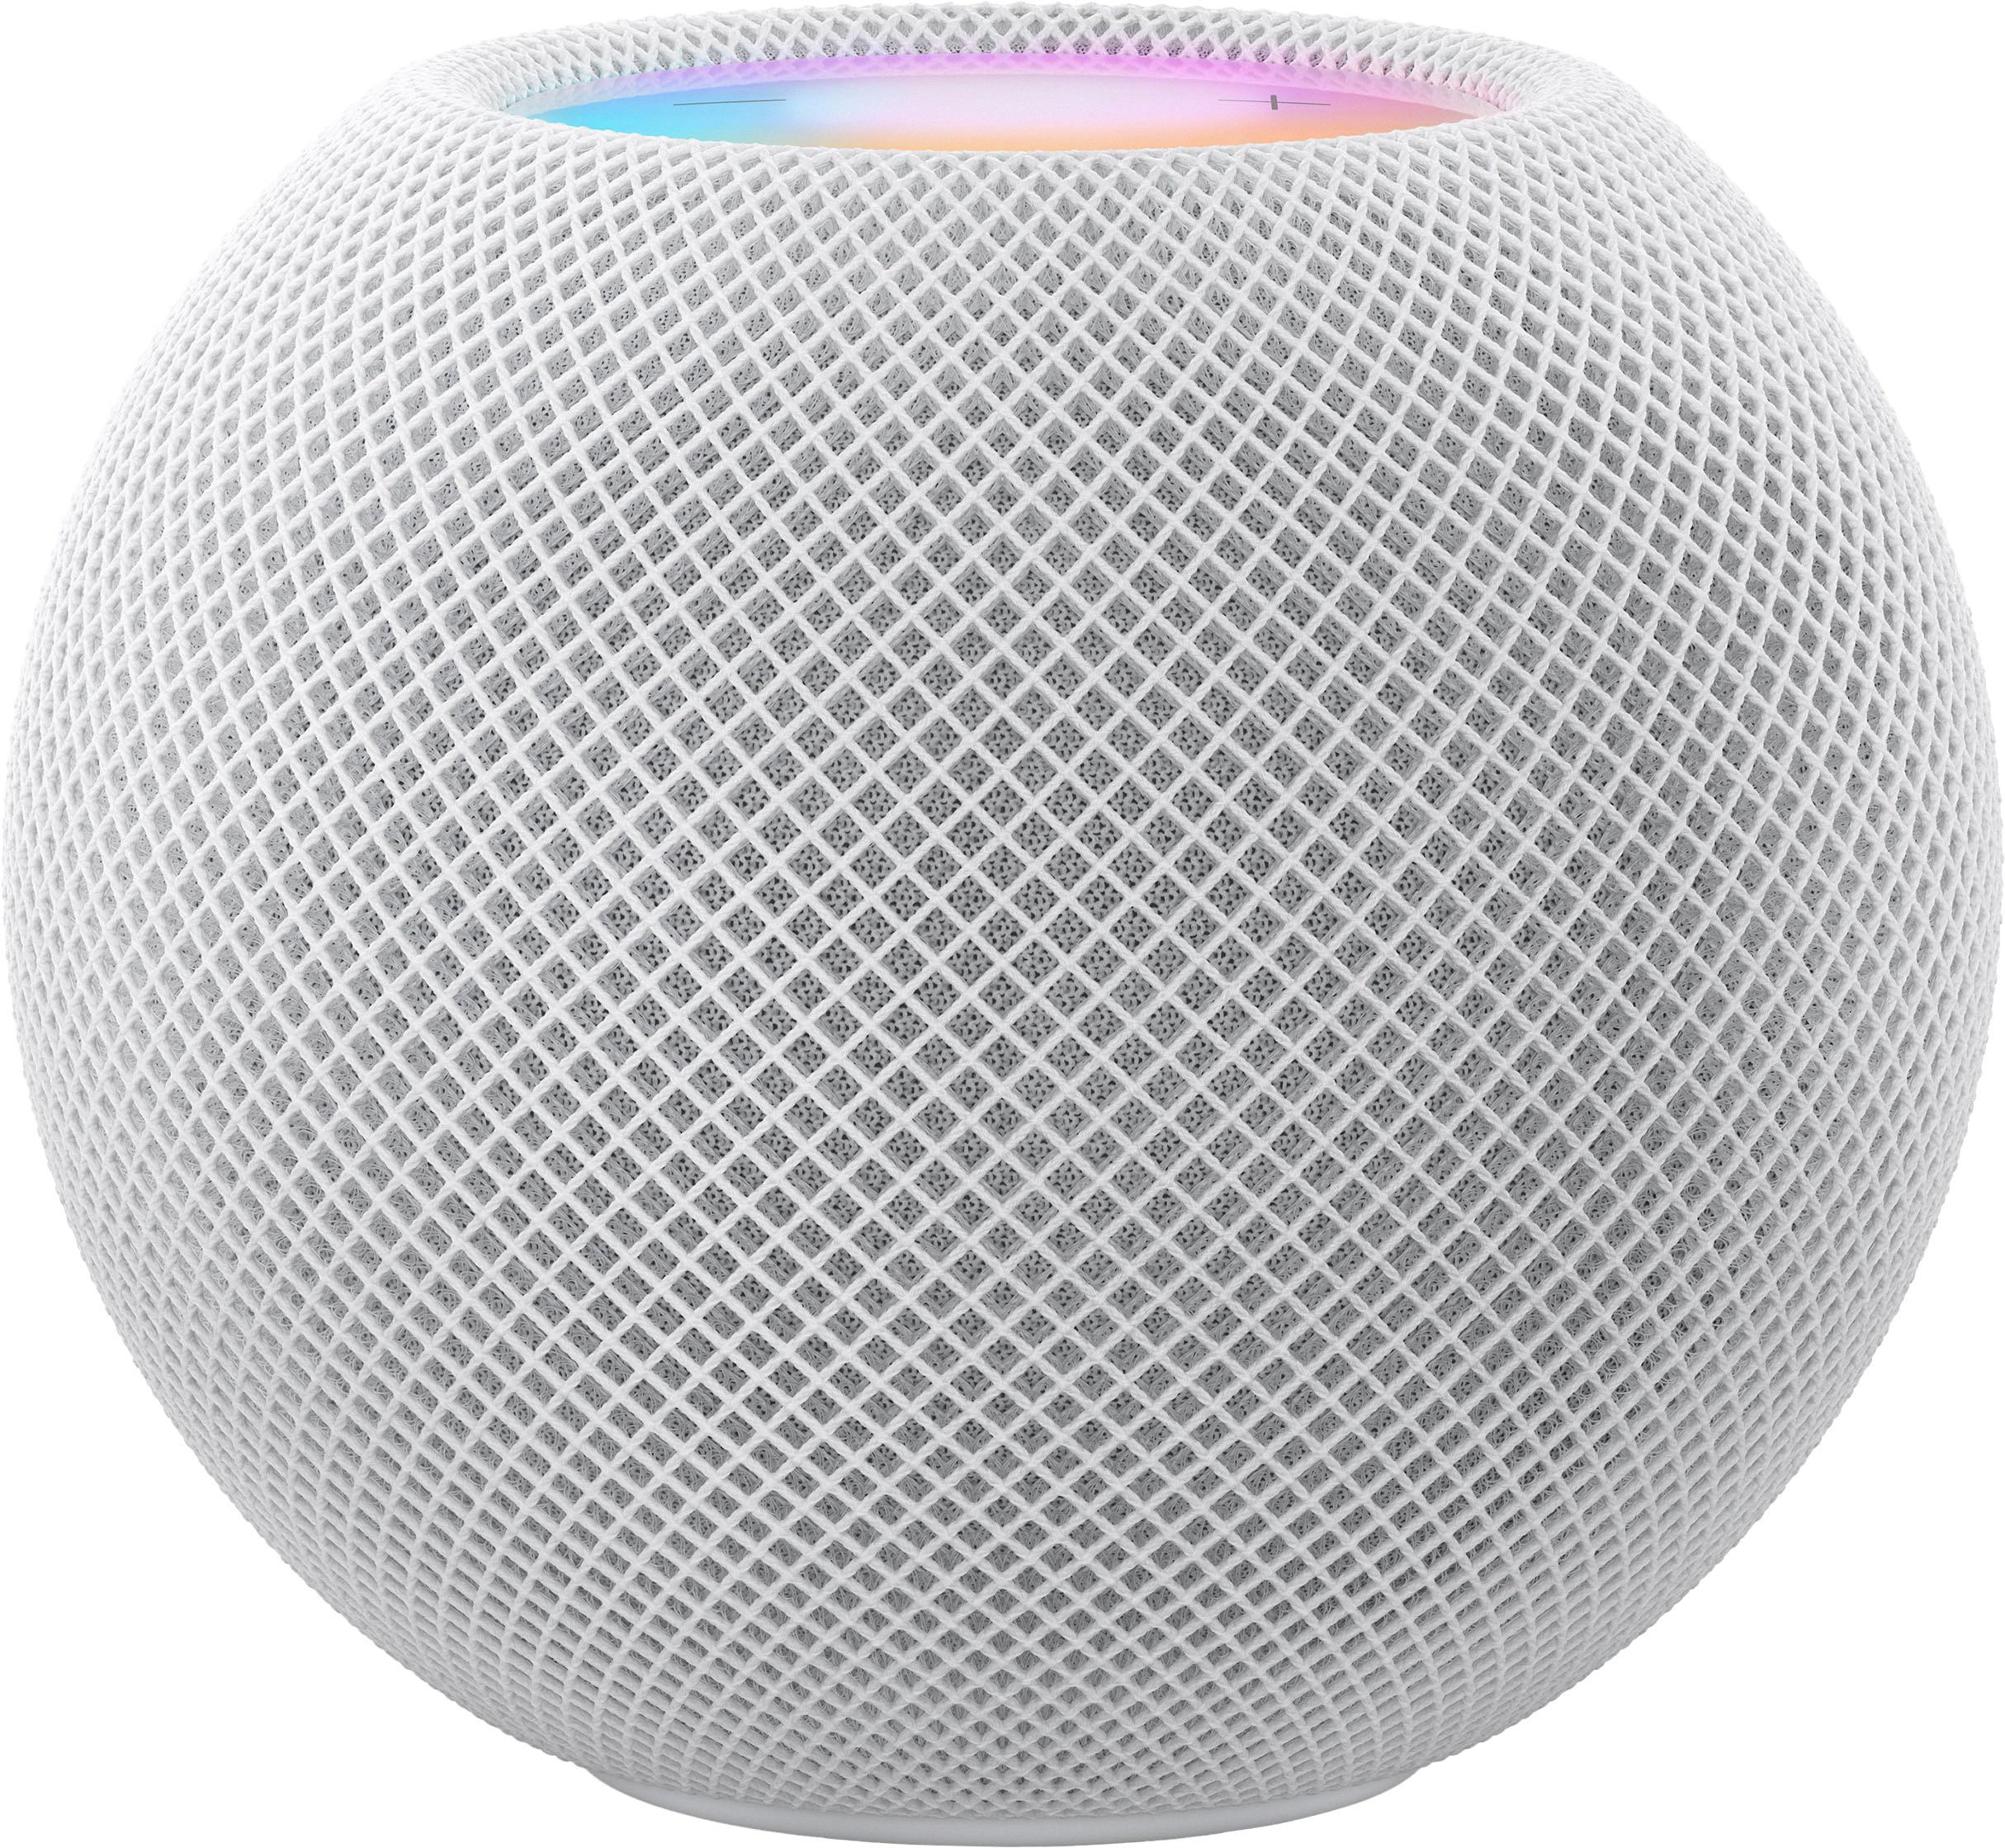 Can Two Users Access HomePod? 5